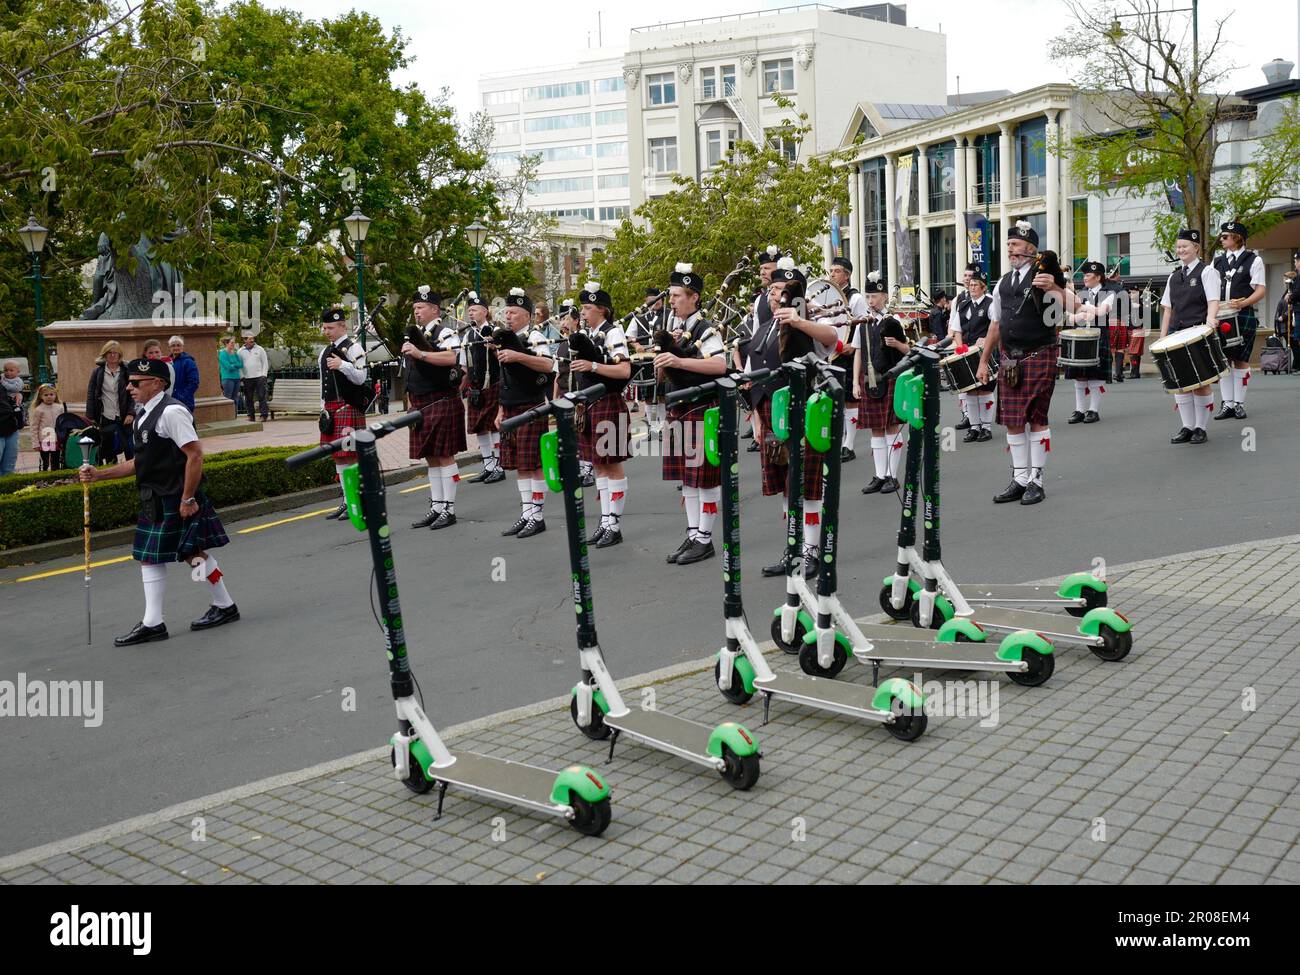 Parade of bagpipers in Dunedin on the South Island of New Zealand Stock Photo